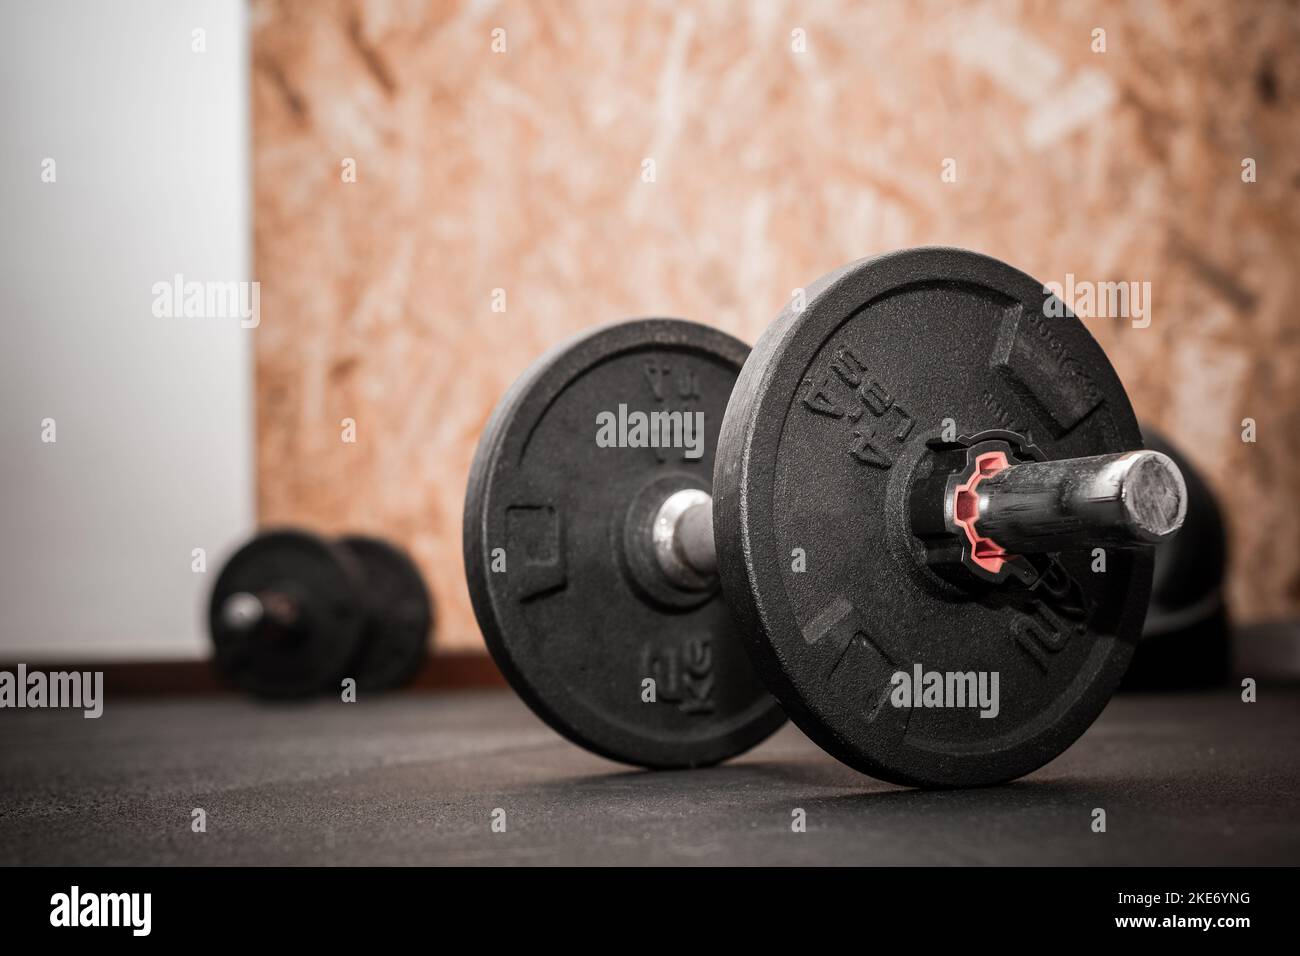 https://c8.alamy.com/comp/2KE6YNG/close-up-of-44lbs-or-2kg-loadable-dumbbell-bodybuilding-equipment-on-the-floor-at-the-gym-with-blurred-background-and-empty-space-for-text-2KE6YNG.jpg